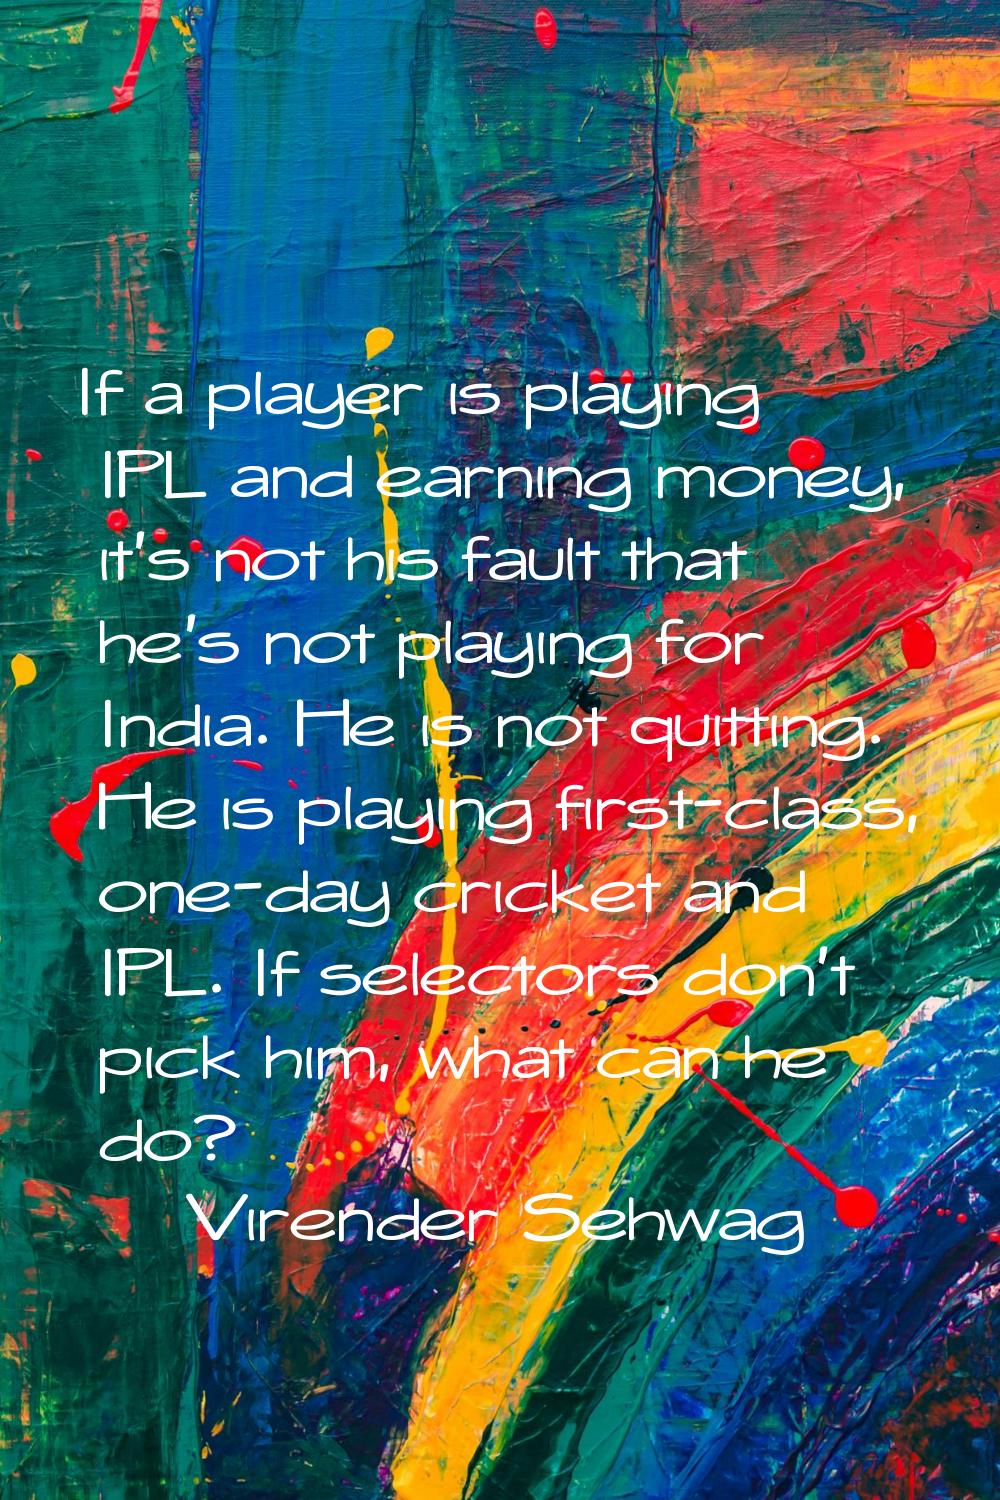 If a player is playing IPL and earning money, it's not his fault that he's not playing for India. H